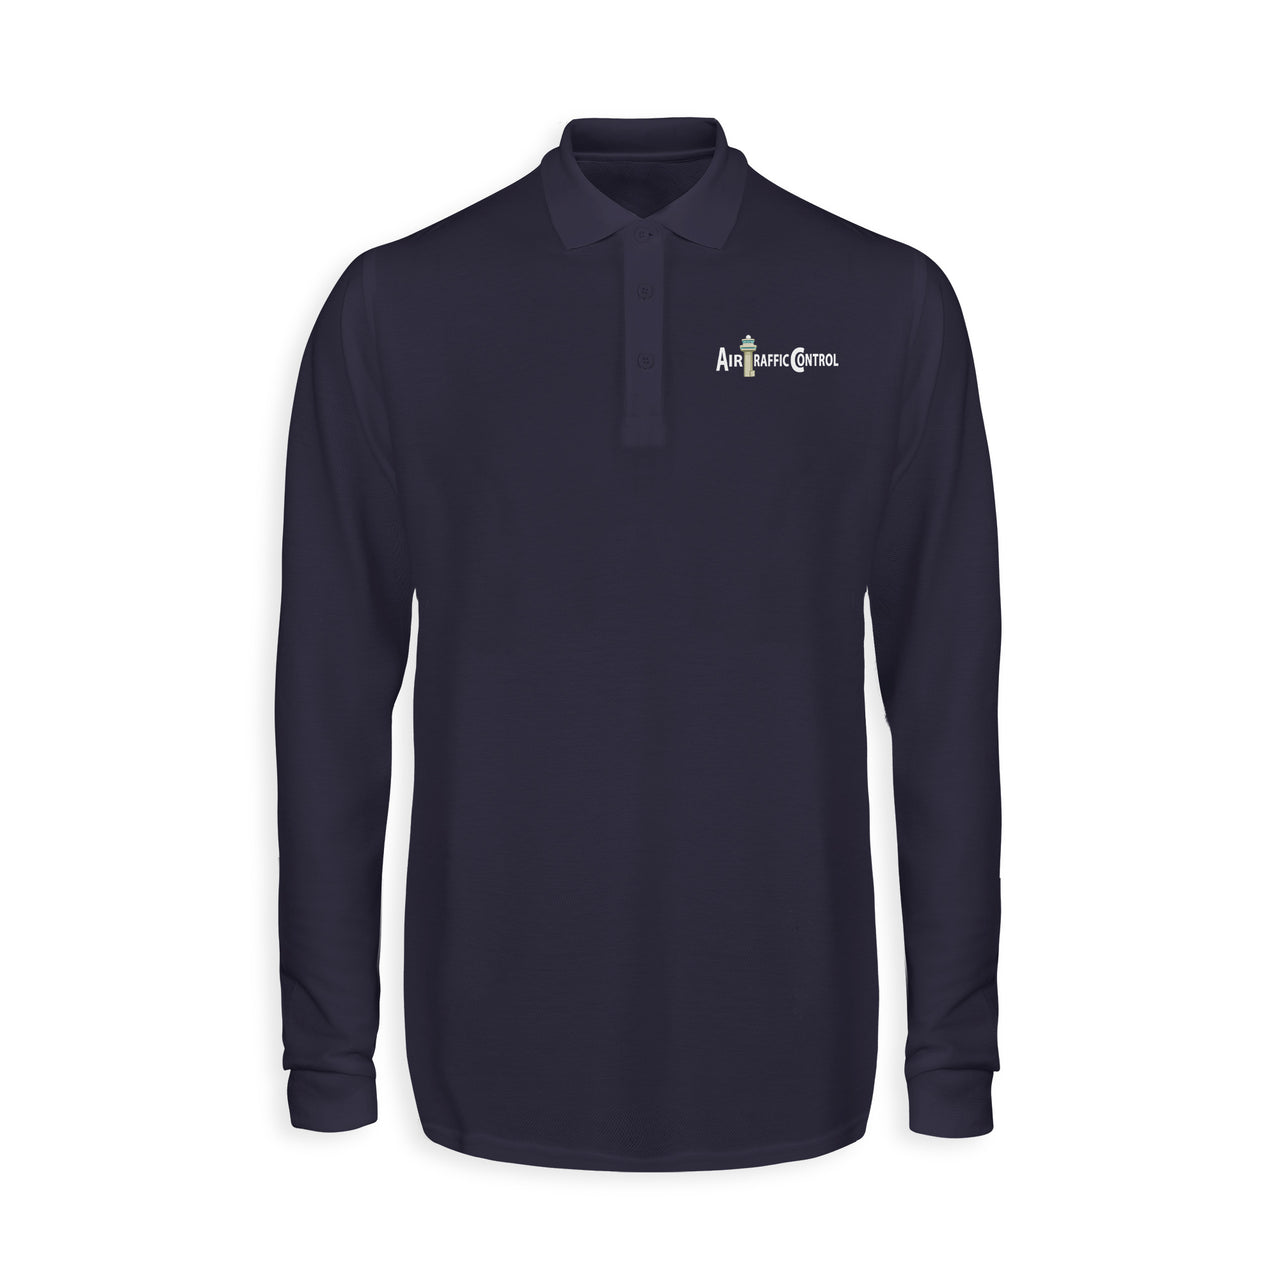 Air Traffic Control Designed Long Sleeve Polo T-Shirts